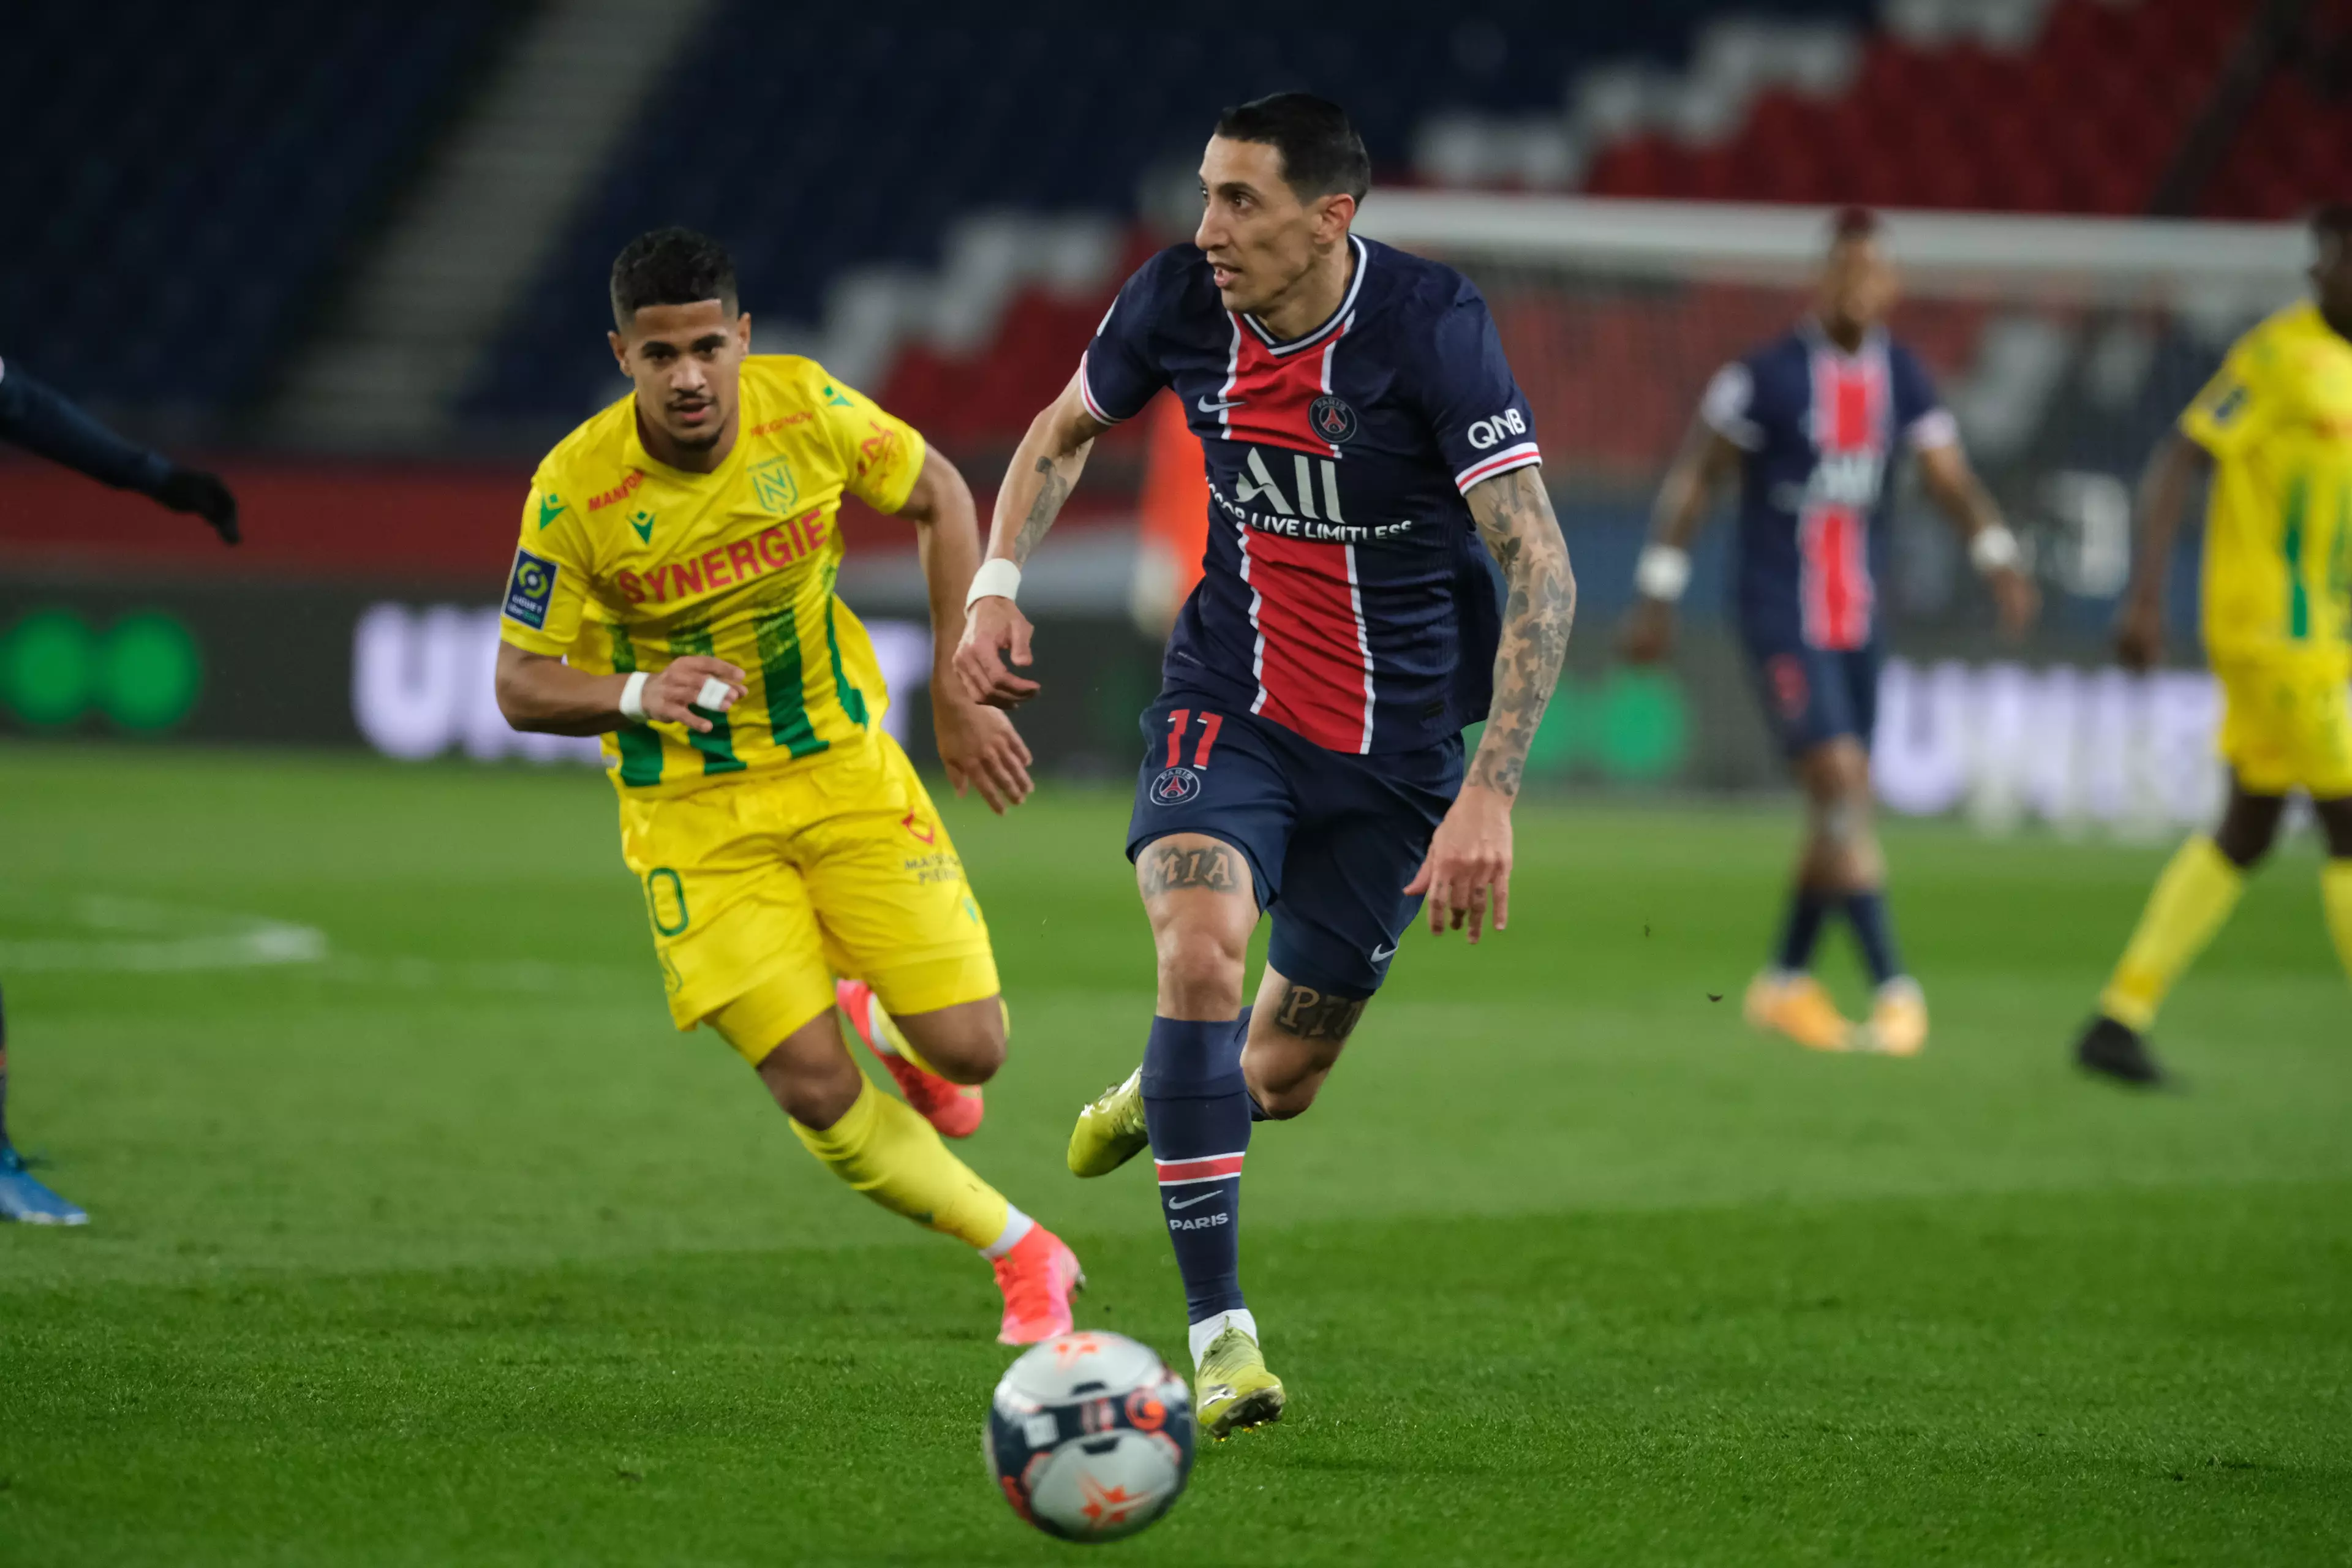 Di Maria playing for PSG before being subbed off. Image: PA Images